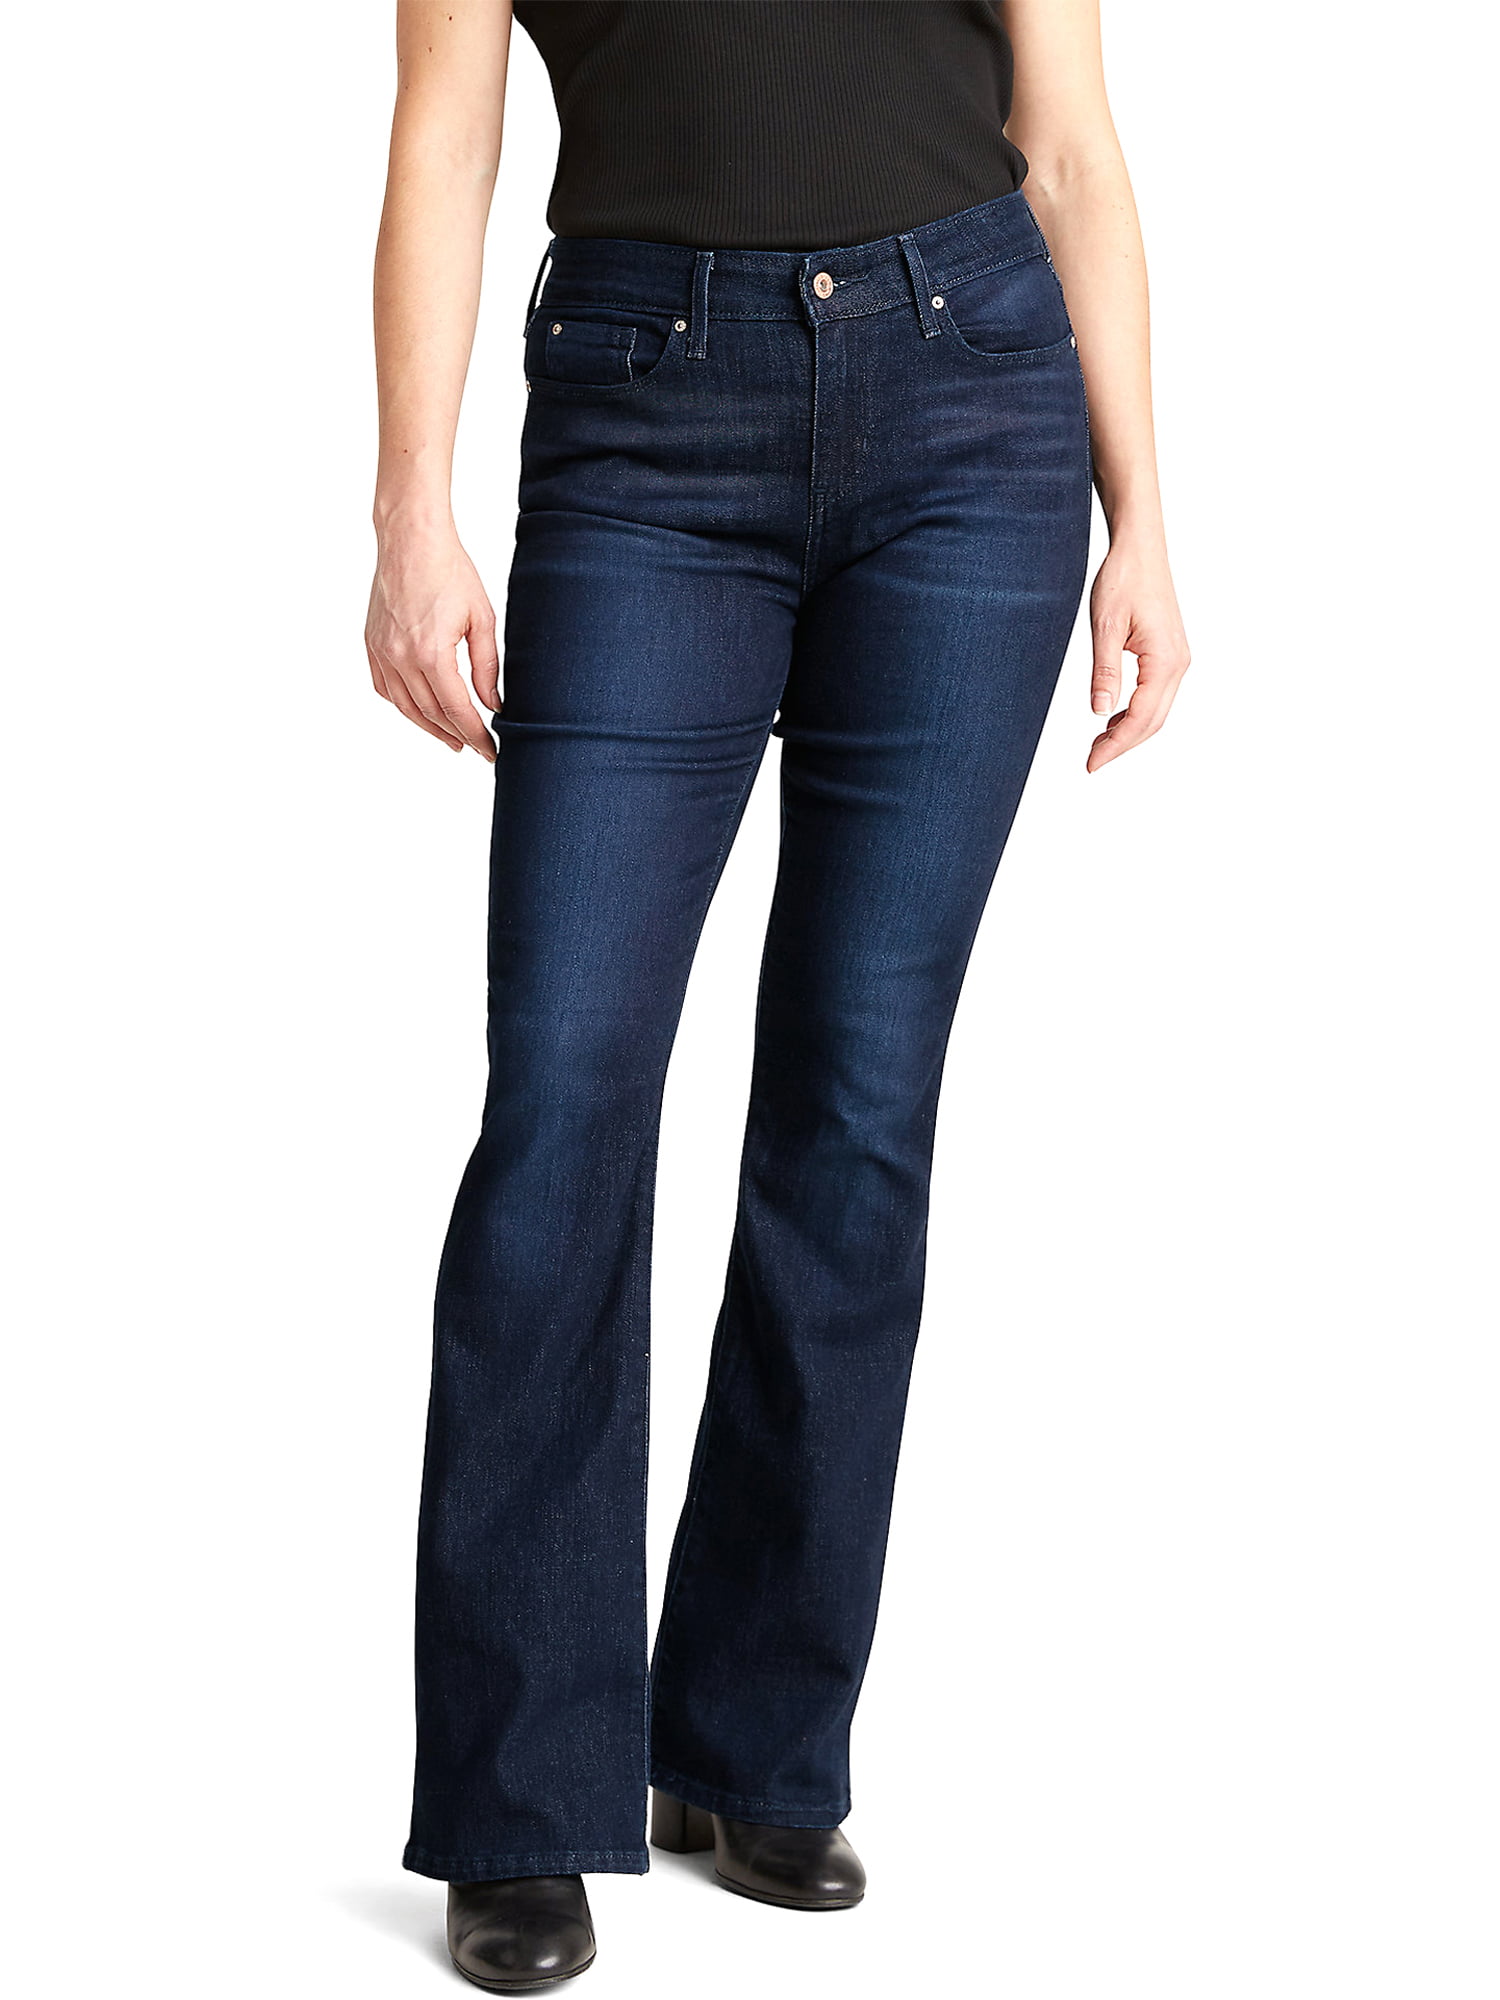 Buy > levi strauss bootcut jeans > in stock